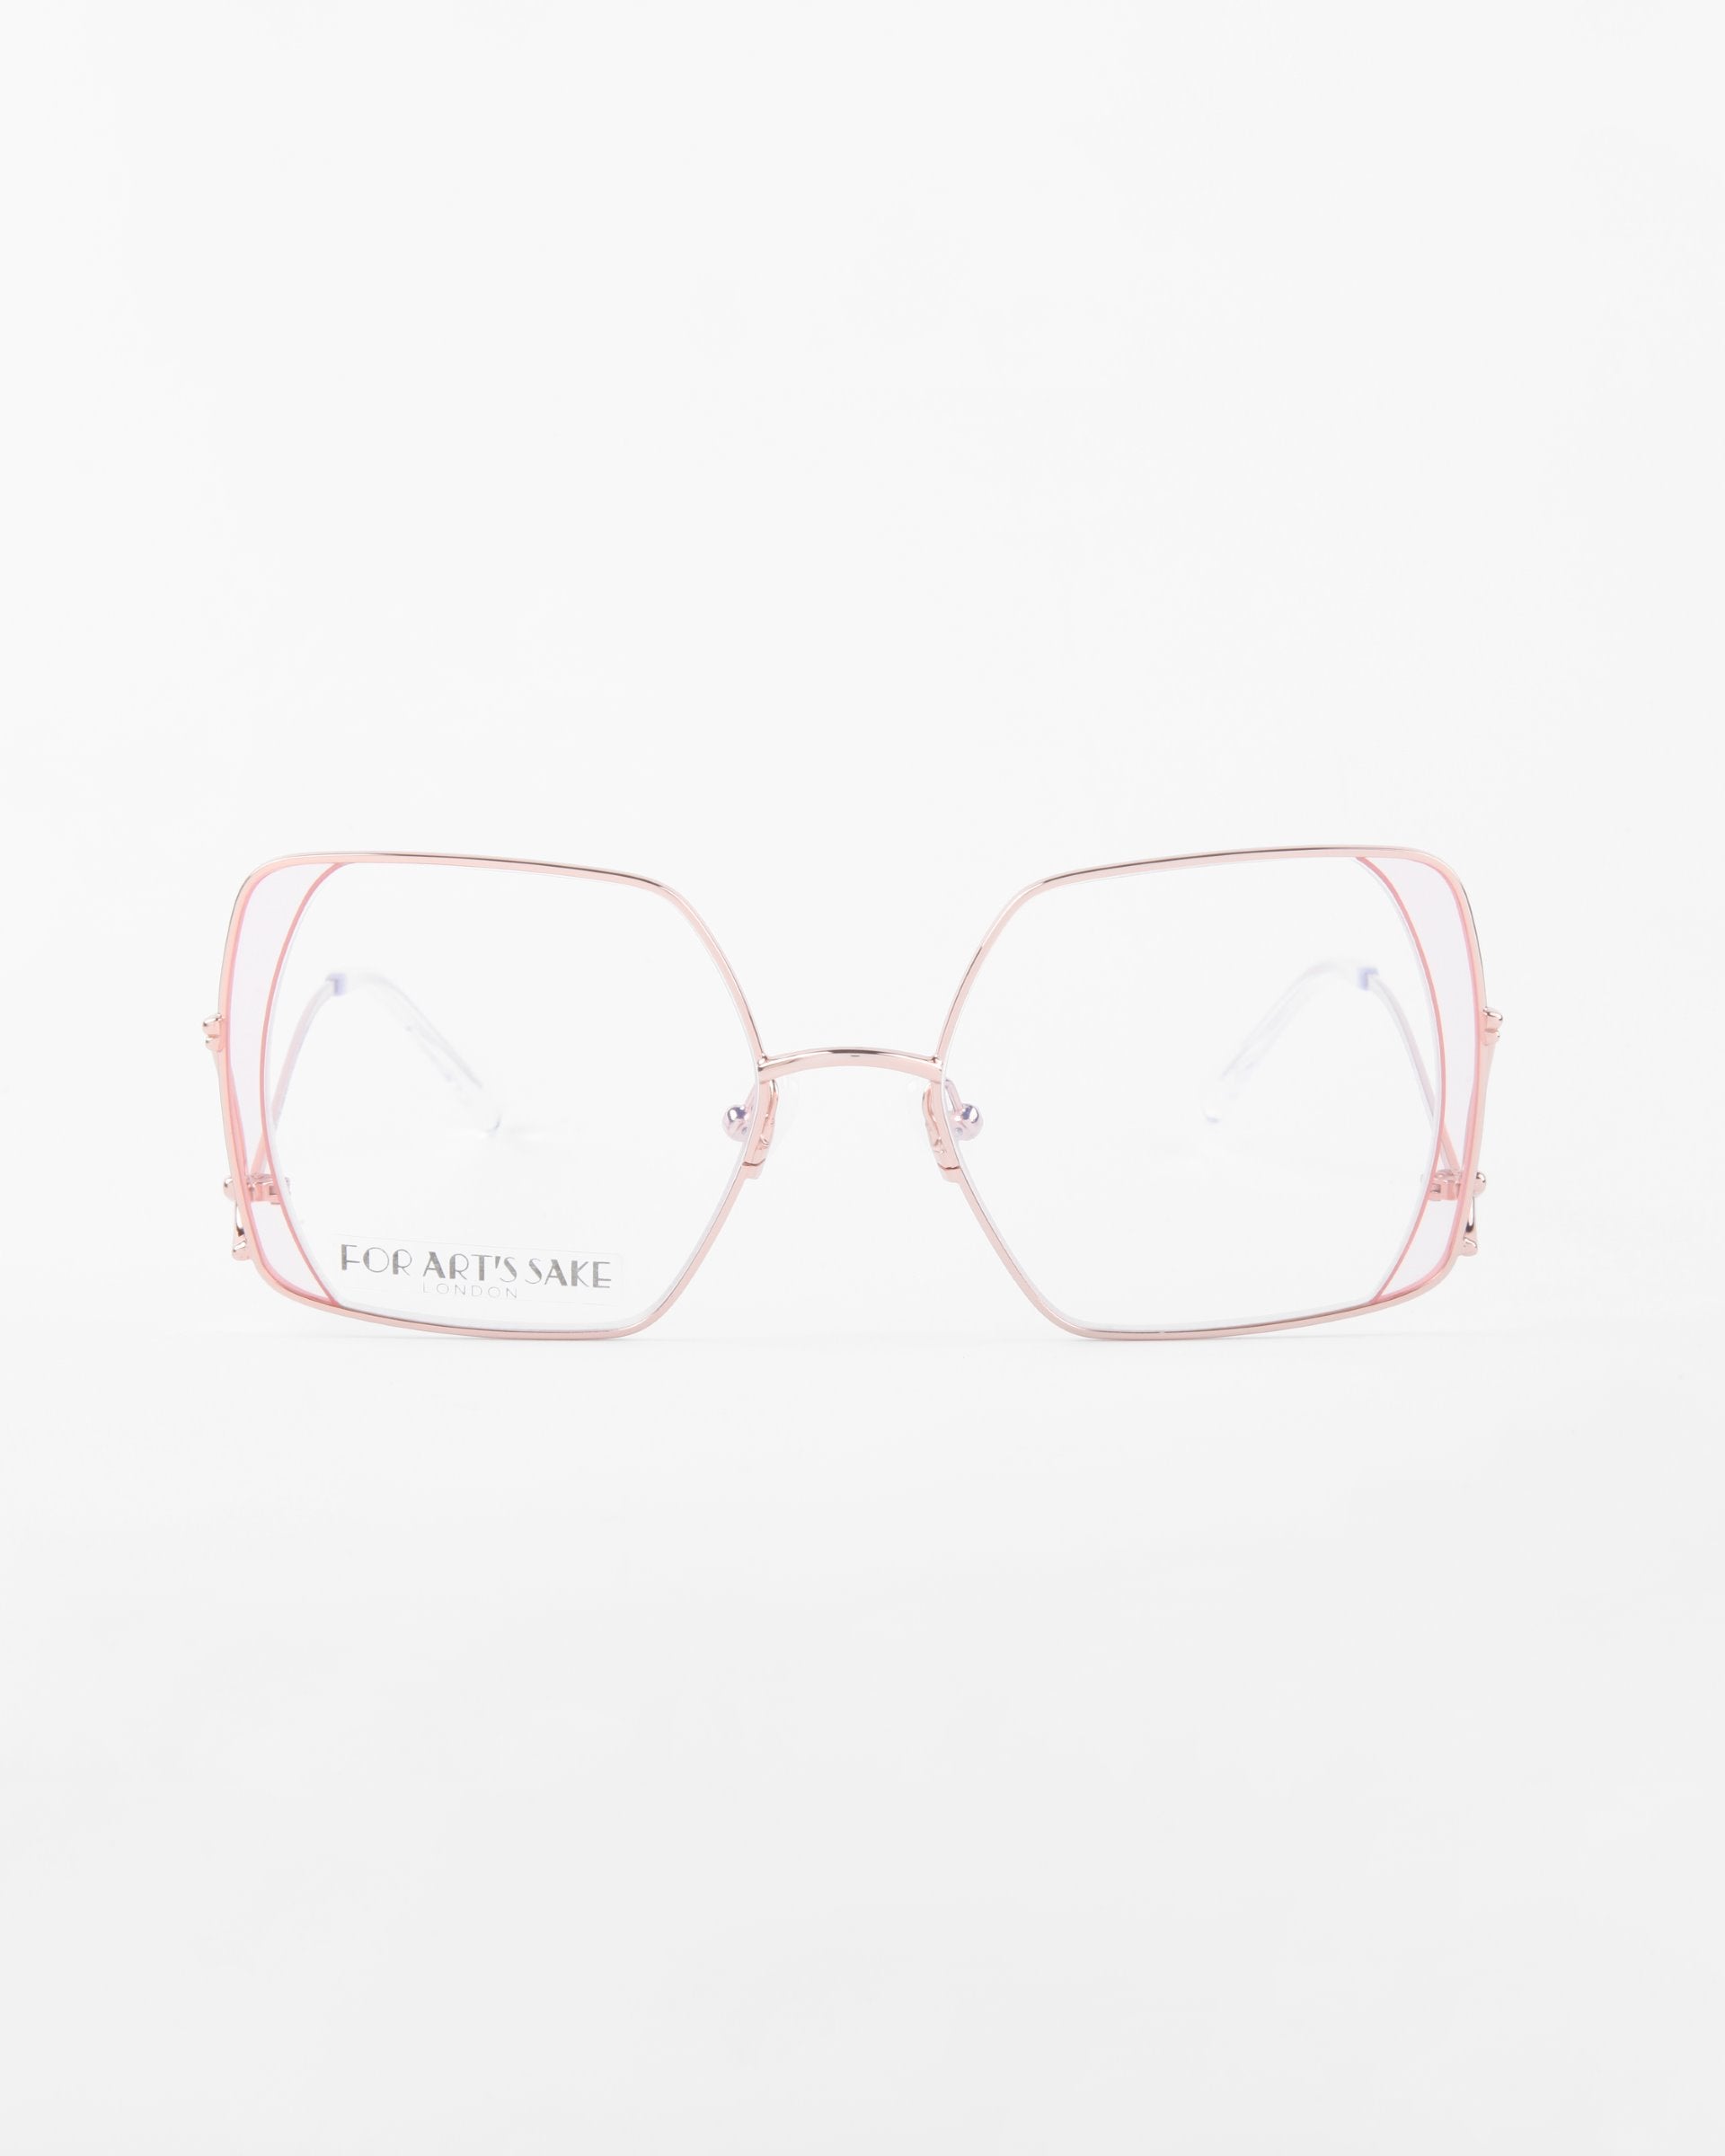 A pair of oversized eyeglasses featuring square-shaped lenses with a double frame design. The outer frame is made of thin, pink stainless steel, creating a modern and stylish look. The clear lenses are centered, and the background is plain white. These eyeglasses are called Candy by For Art's Sake®.